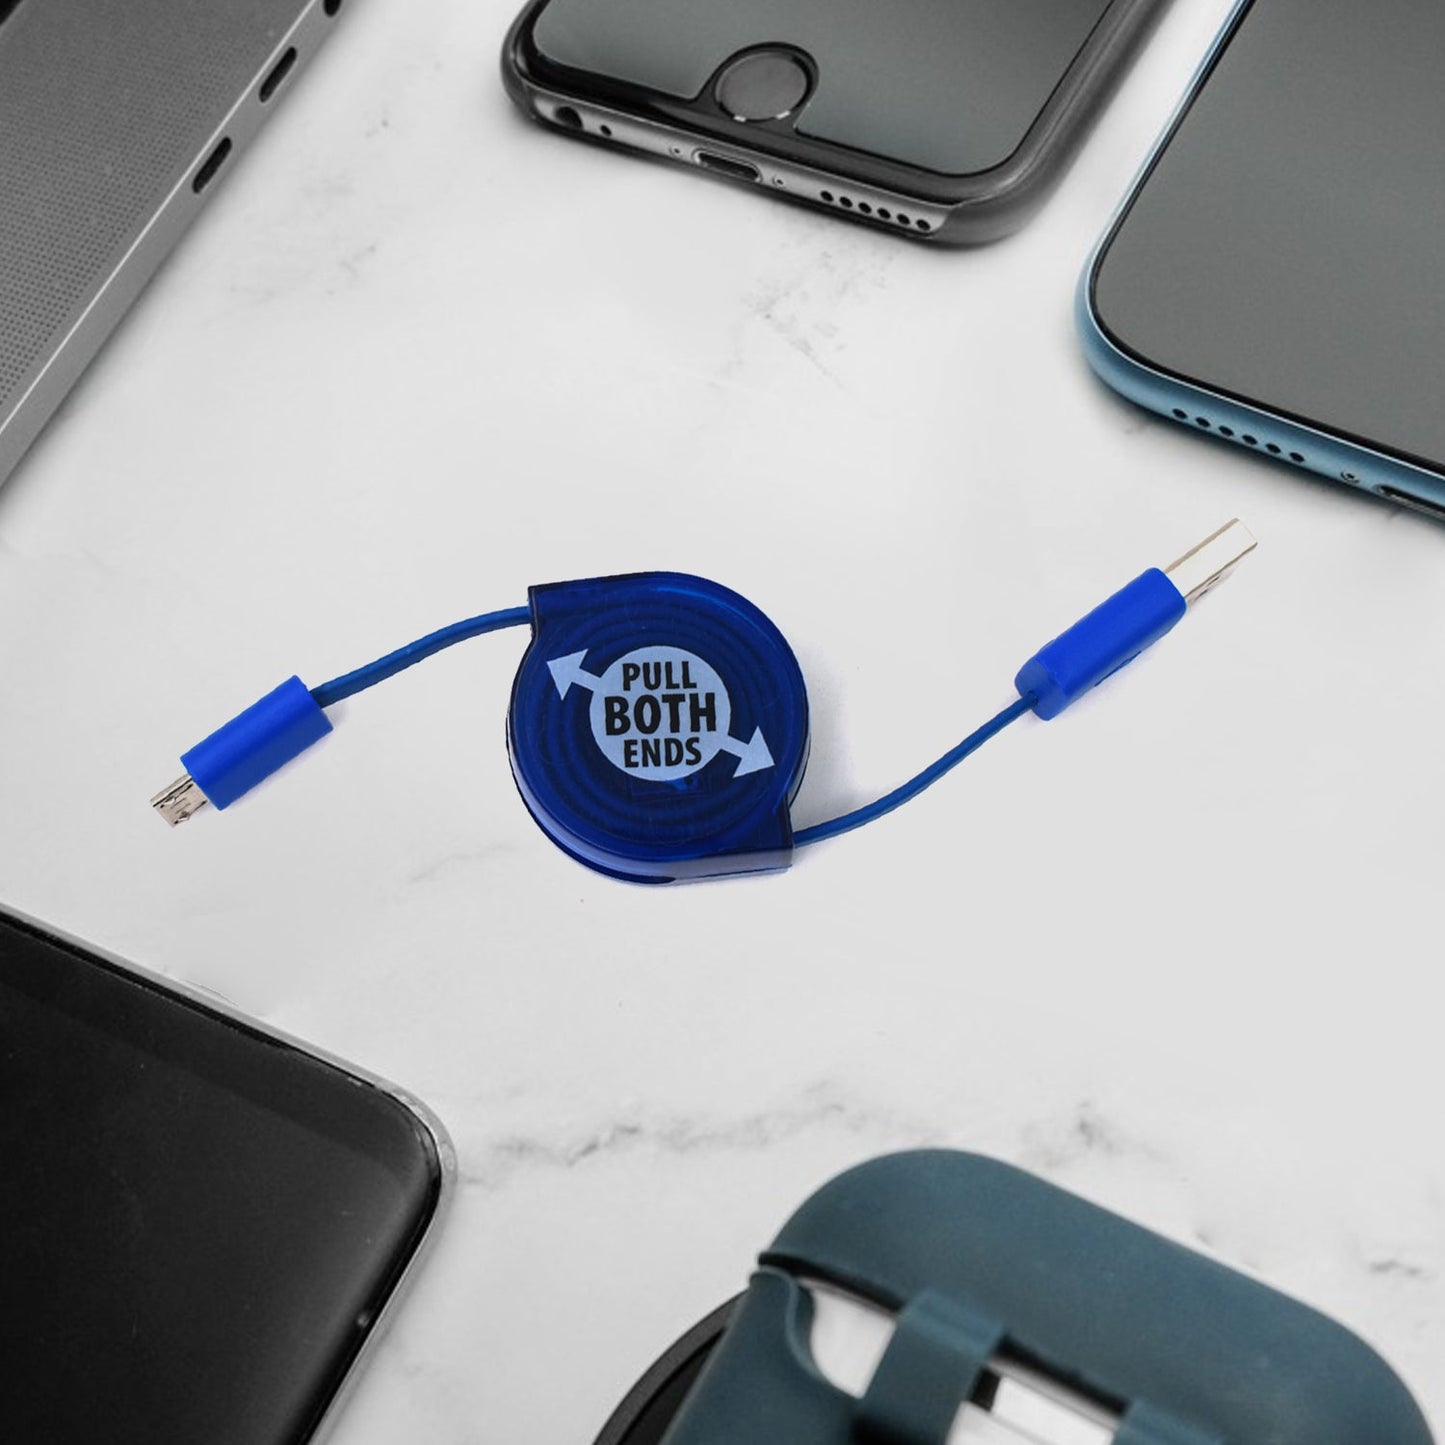 7400 Retractable Usb Charge widely used for charging various types of smartphones and technical devices present in all kind of places etc. 